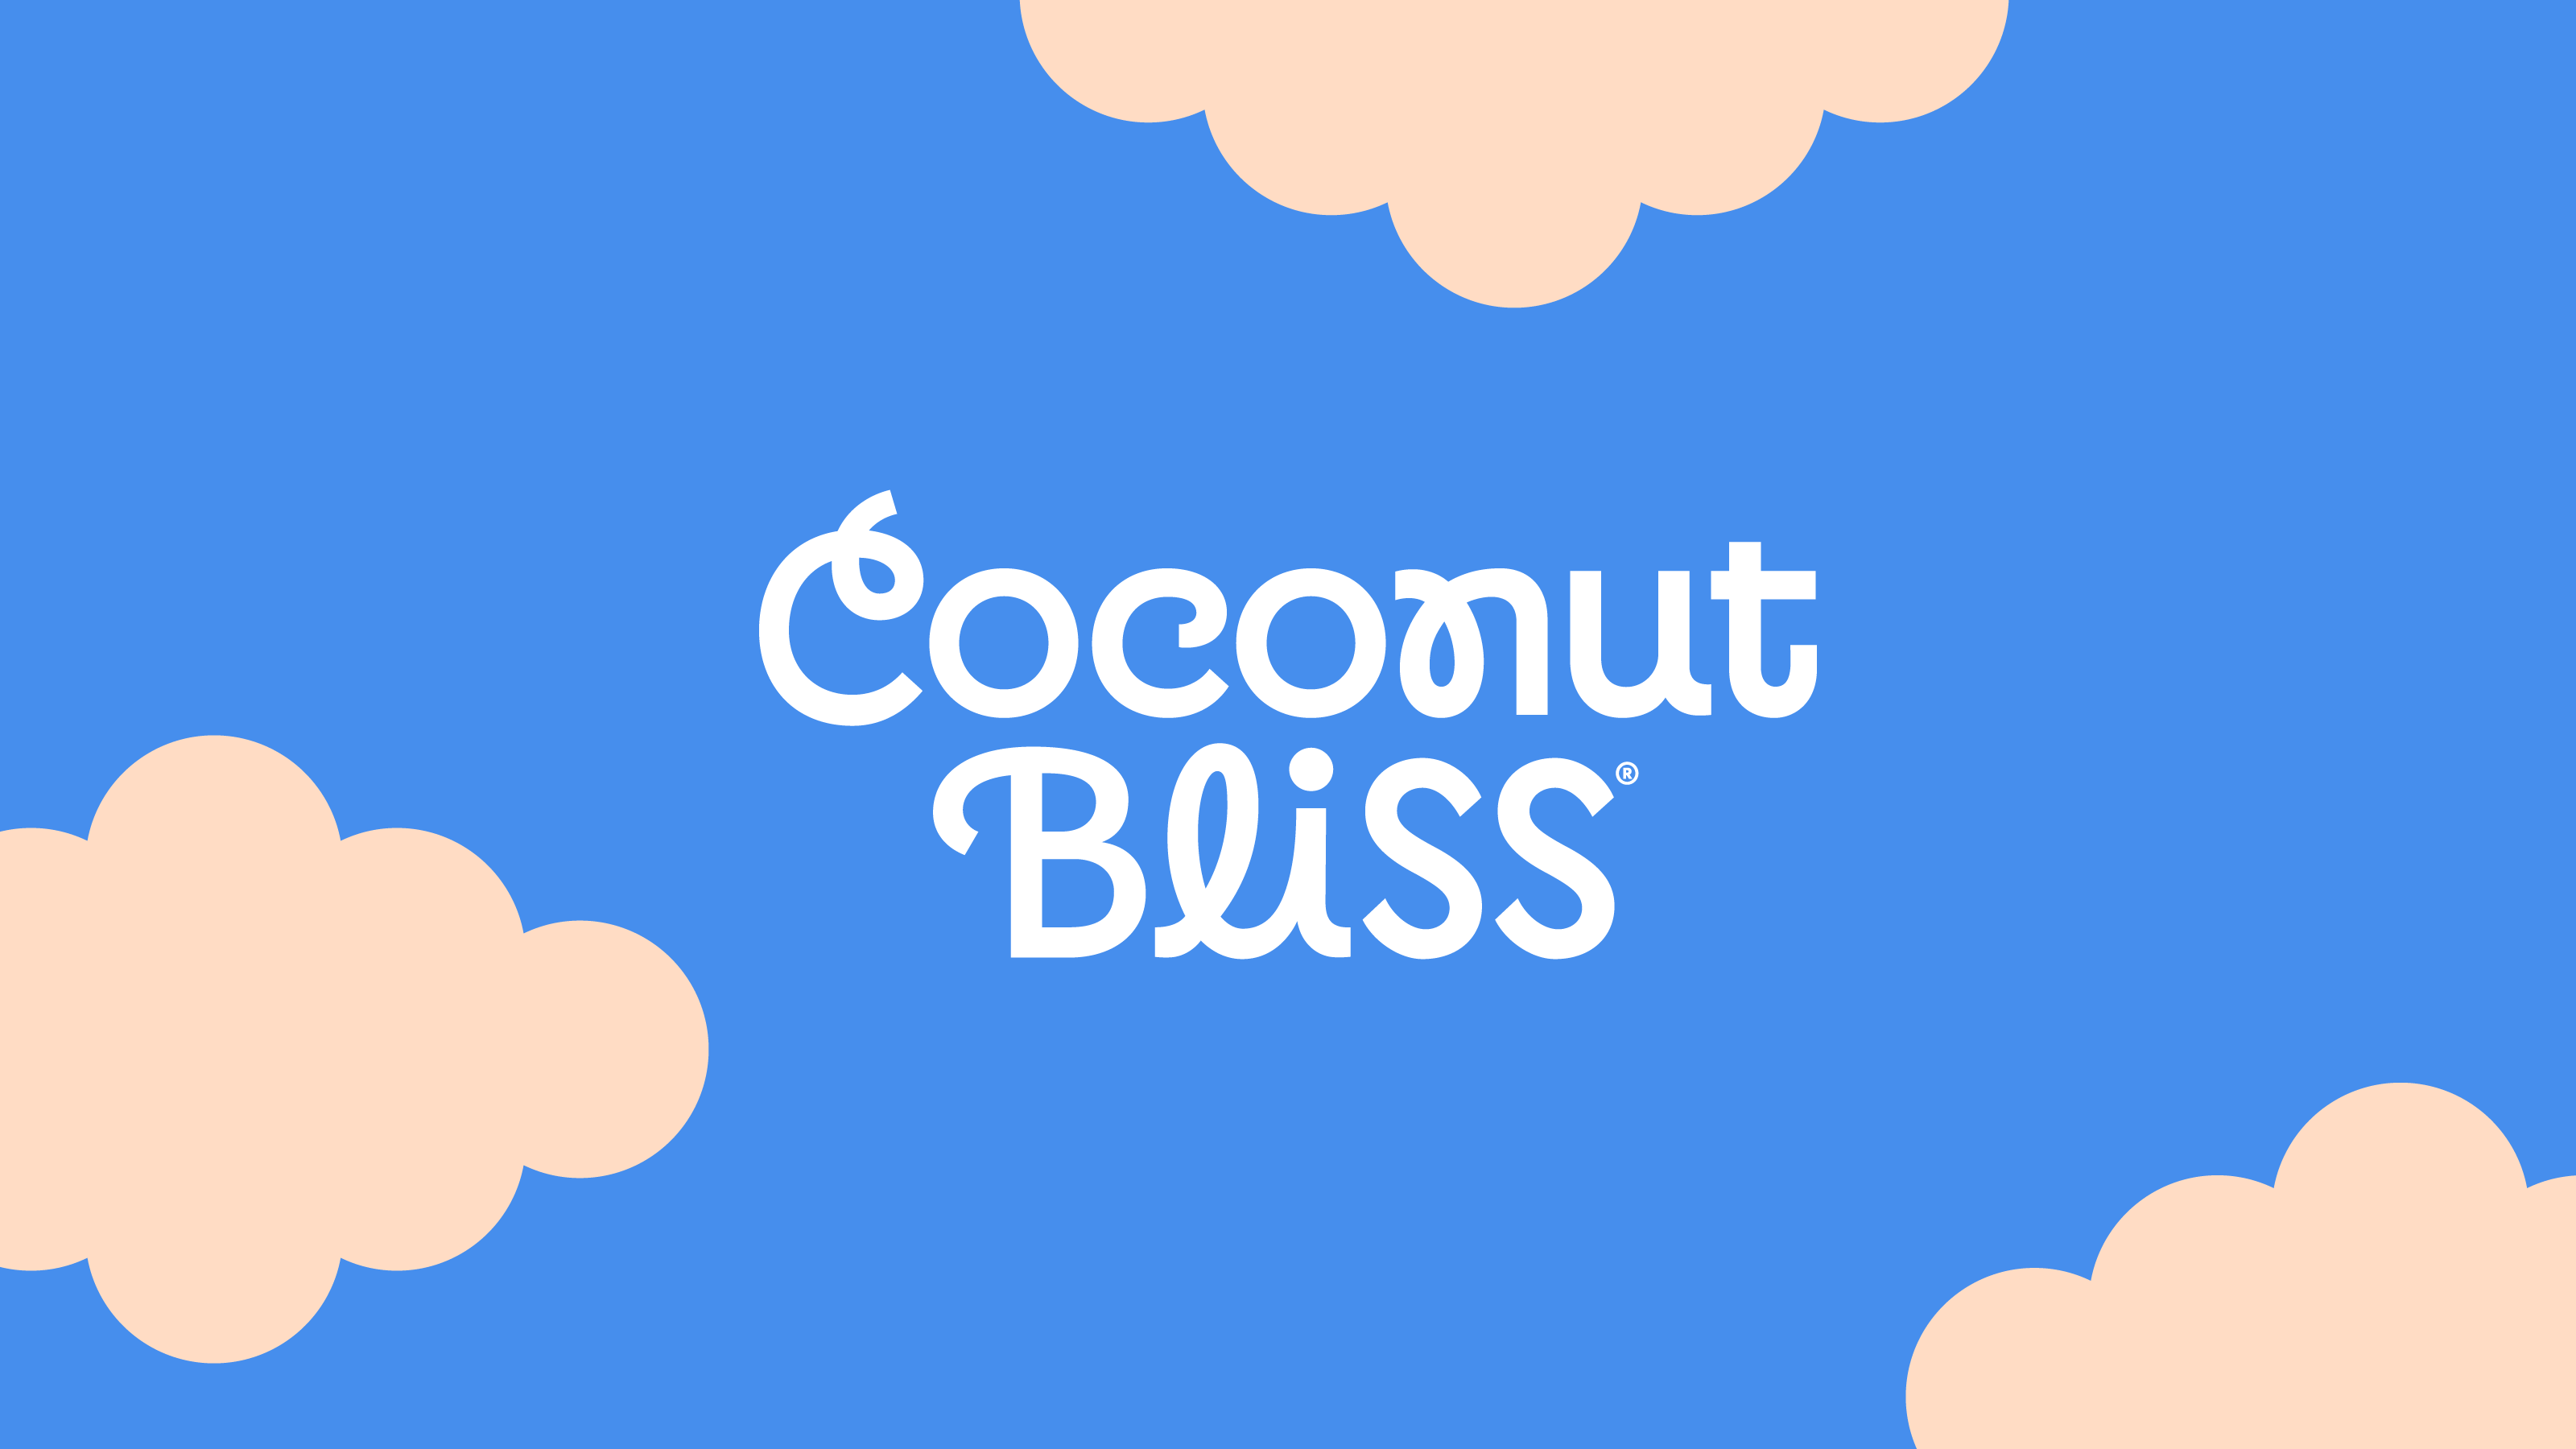 coconut_bliss_logo_with_patterns.gif